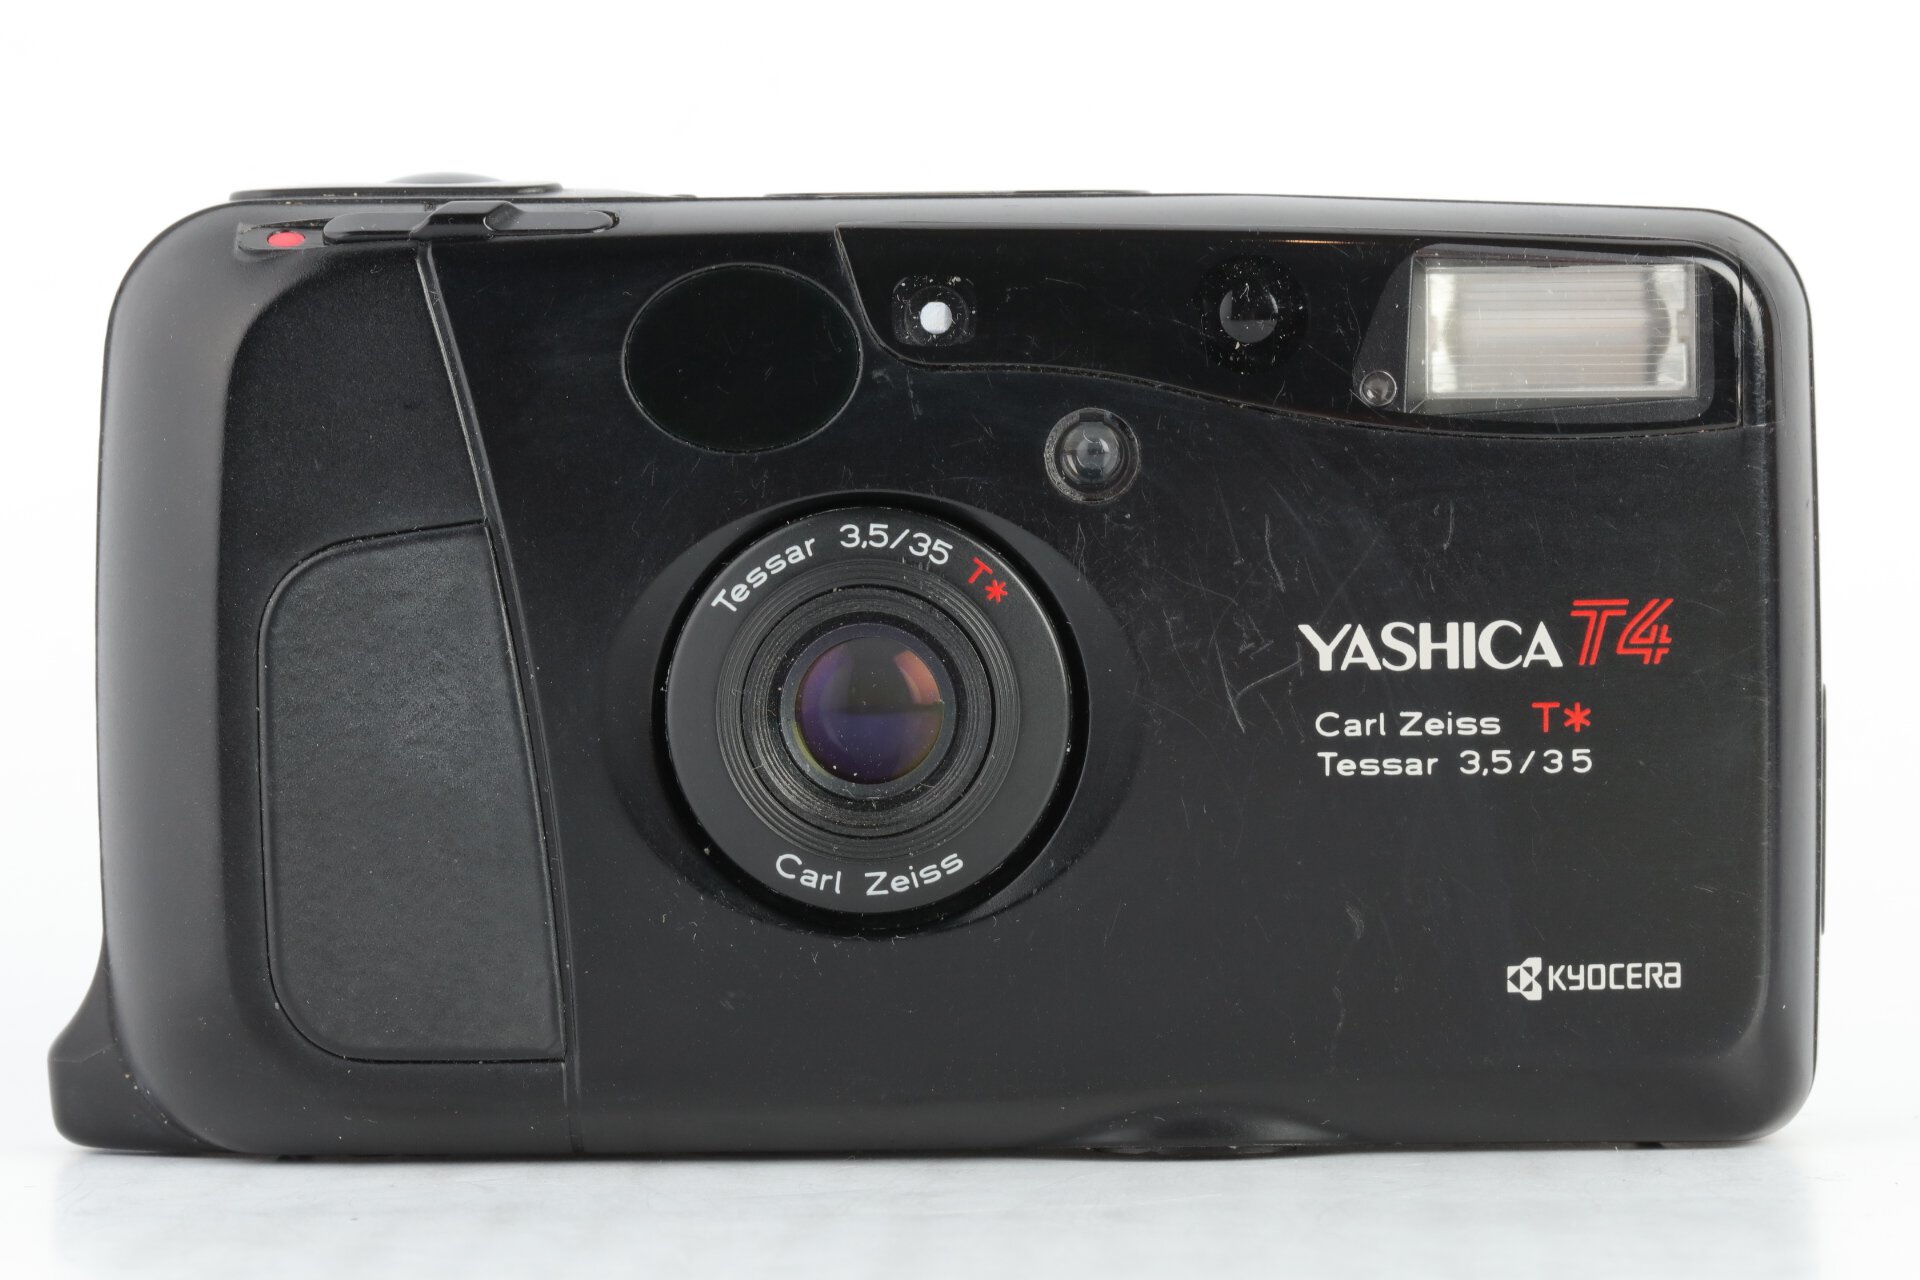 Yashica T4 mit Carl Zeiss 35mm 3,5 Tessar T*